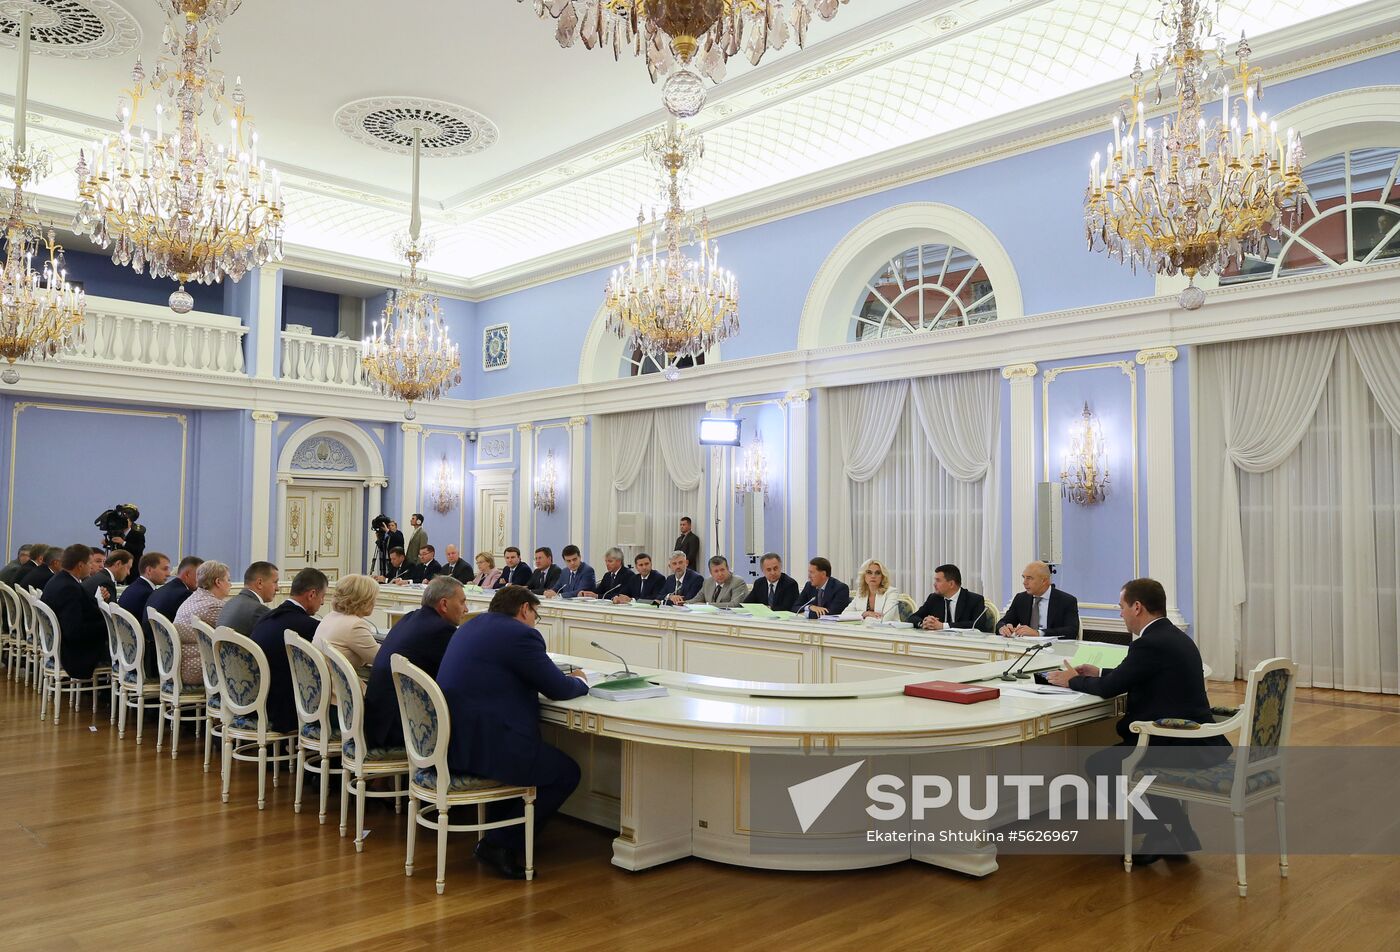 Prime Minister Dmitry Medvedev holds meeting of Government Commission on Budgetary Planning